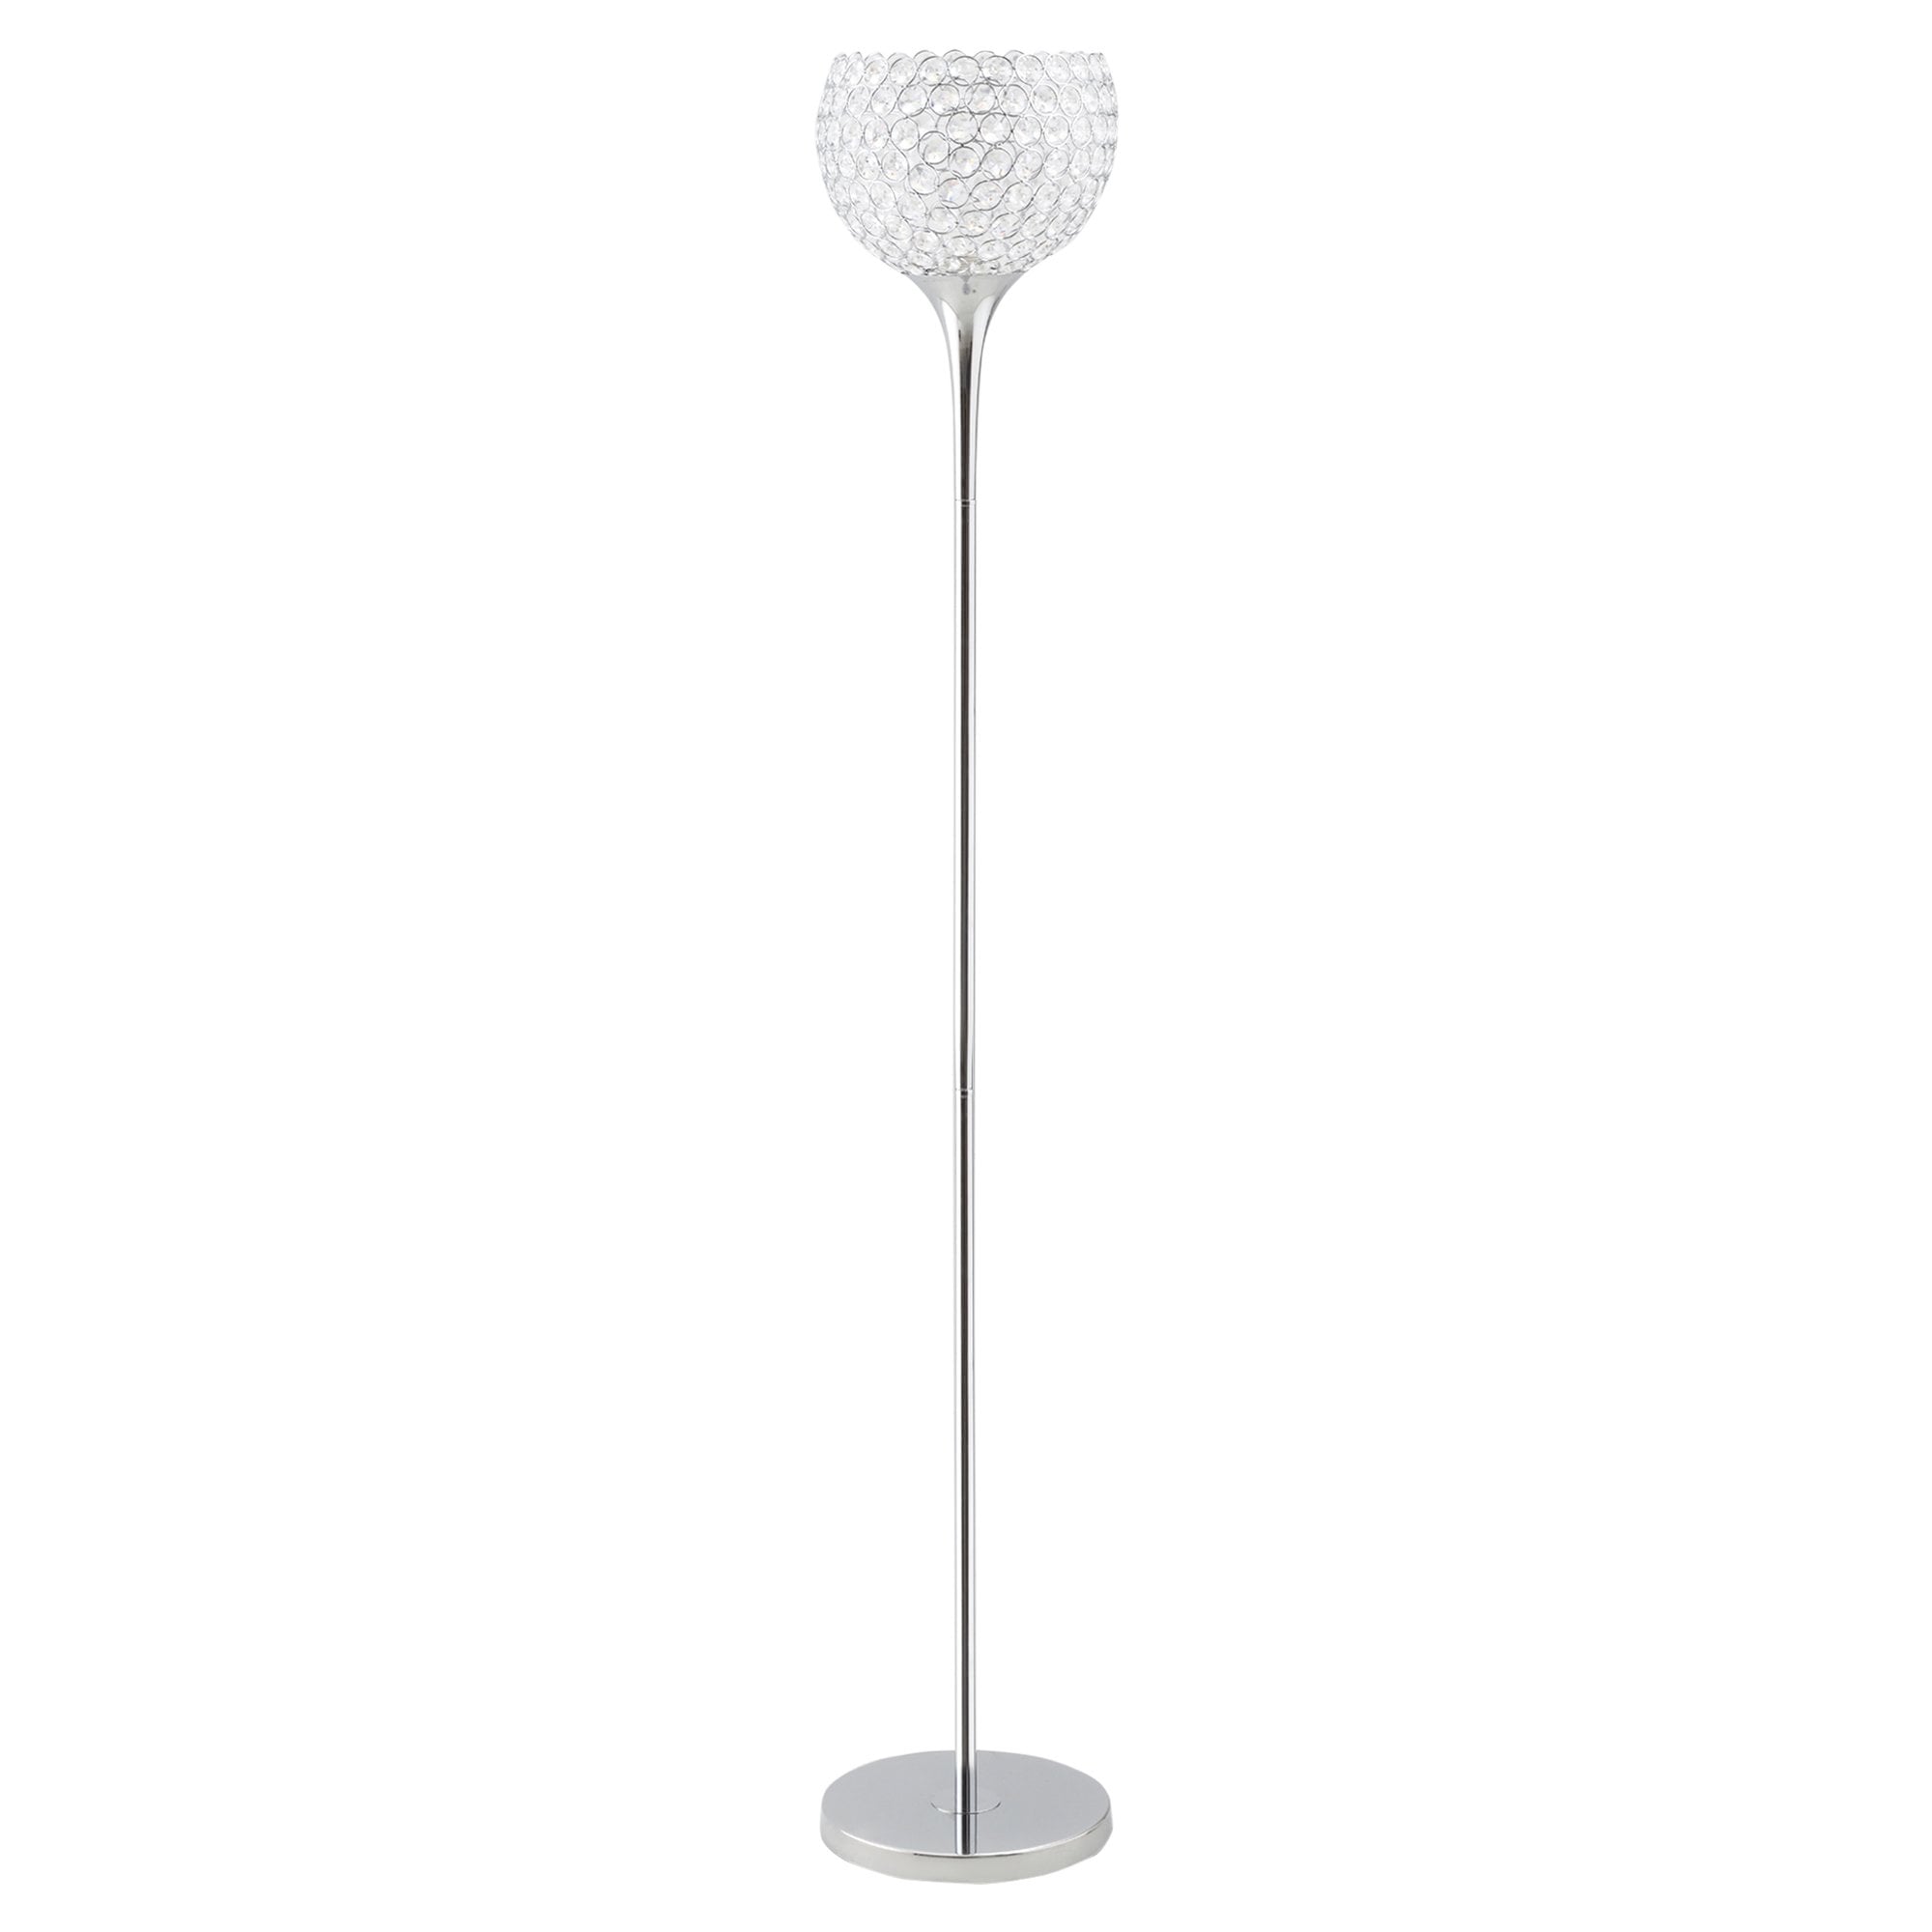 HOMCOM Modern Floor Lamp with K9 Crystal Lampshade - Tall Standing Lamp with E27 Bulb Base and Foot Switch for Living Room Bedroom Study Office Silver